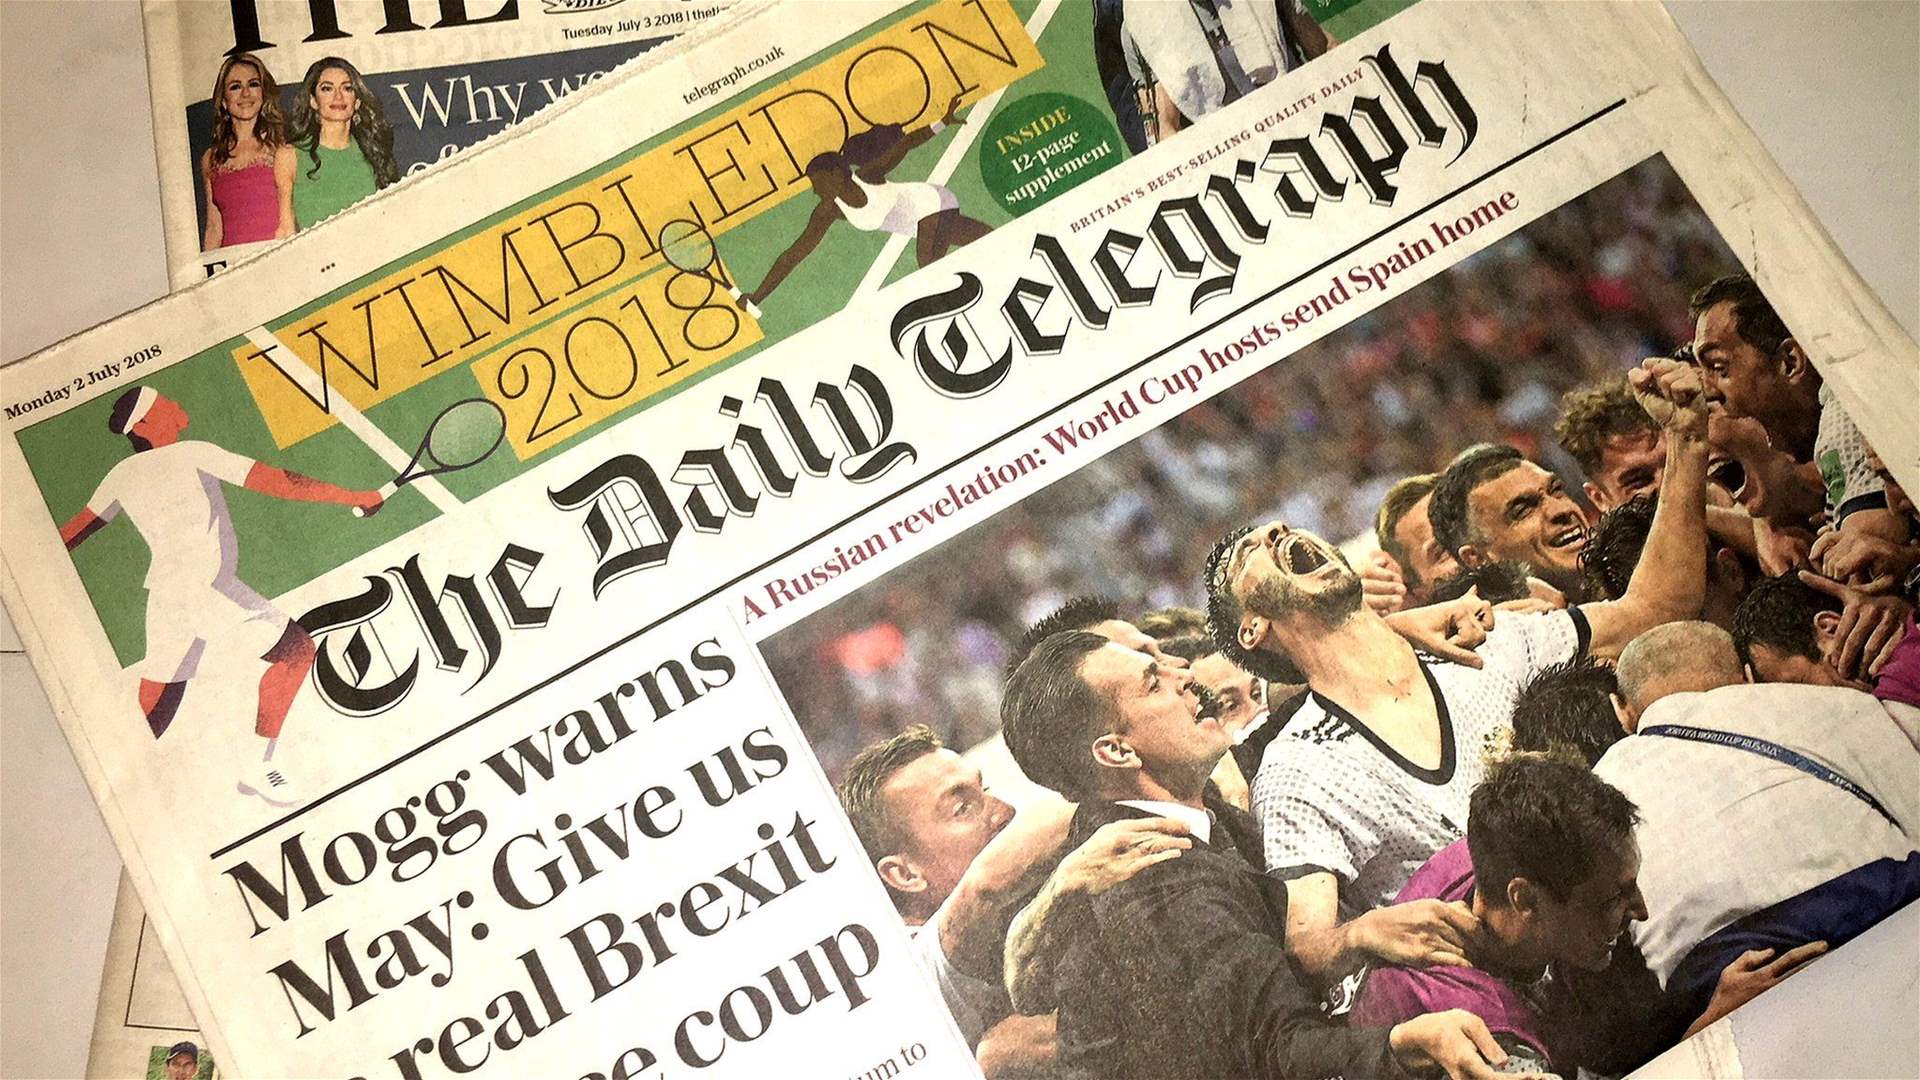 UK considers approval of Abu Dhabi-backed Telegraph newspaper buyout